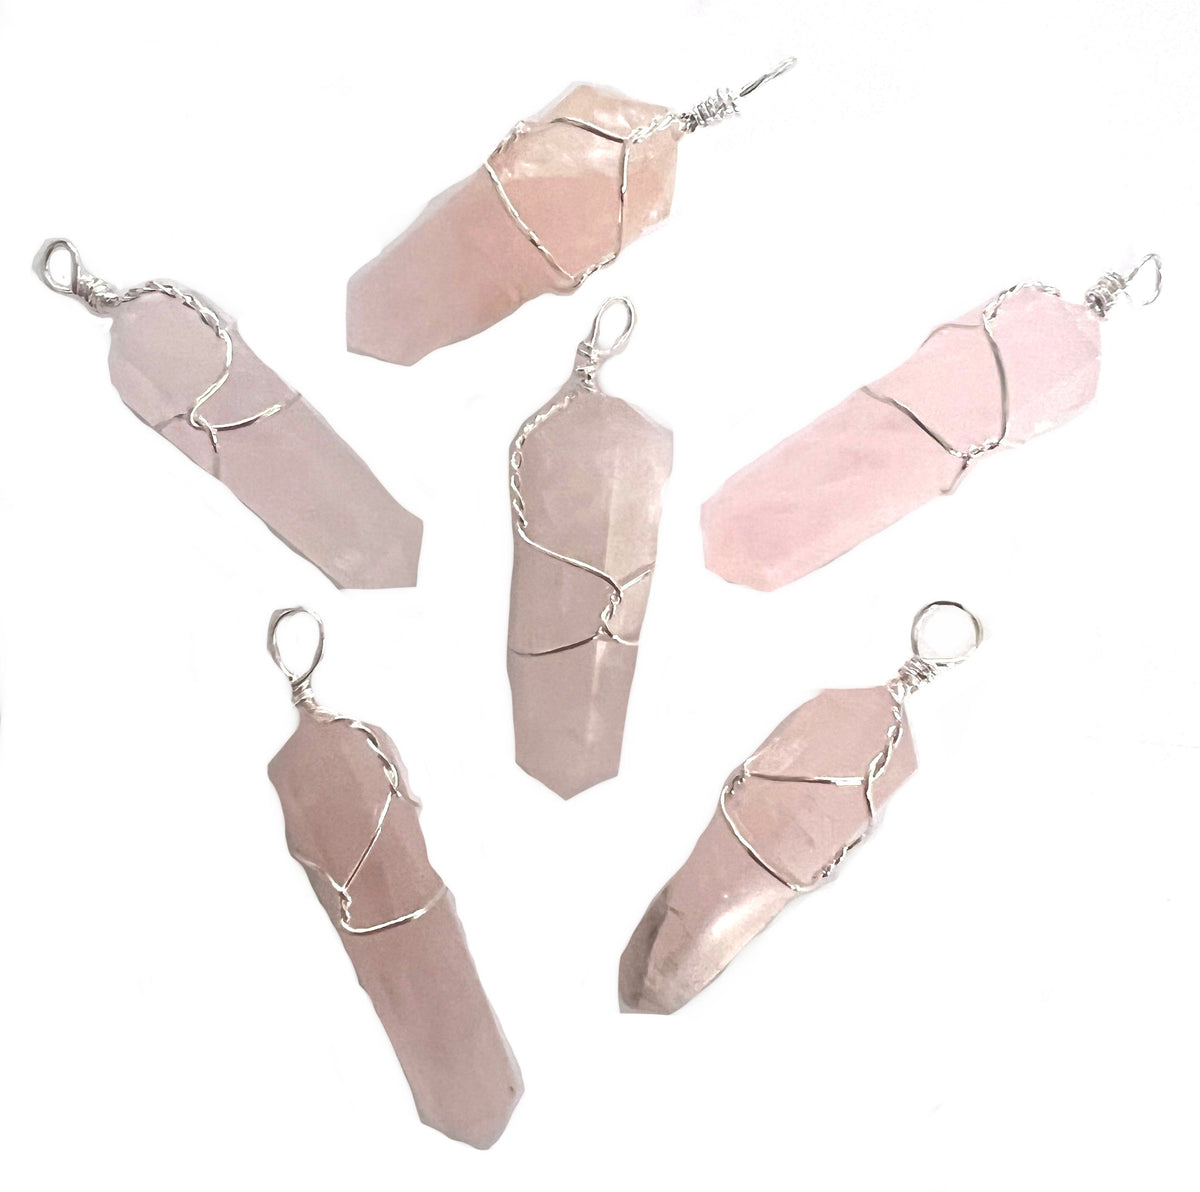 Wholesale ROSE QUARTZ WIRE WRAPPED  STONE PENDANT (sold by the piece or on chain)